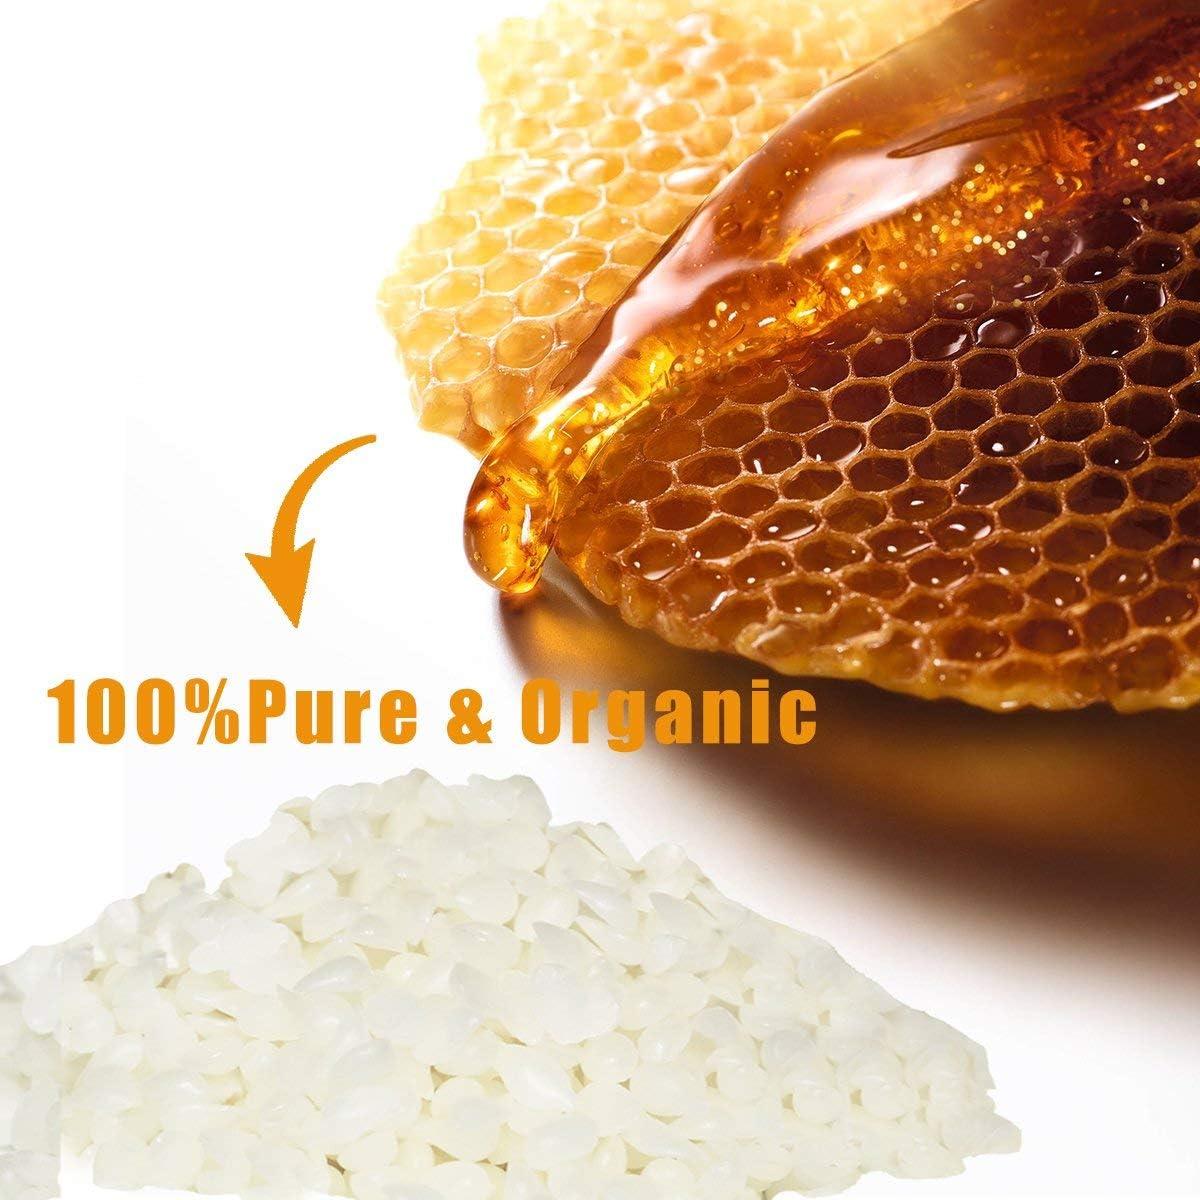  Howemon White Beeswax Pellets 2LB 100% Pure and Natural Triple  Filtered for Skin, Face, Body and Hair Care DIY Creams, Lotions, Lip Balm  and Soap Making Supplies